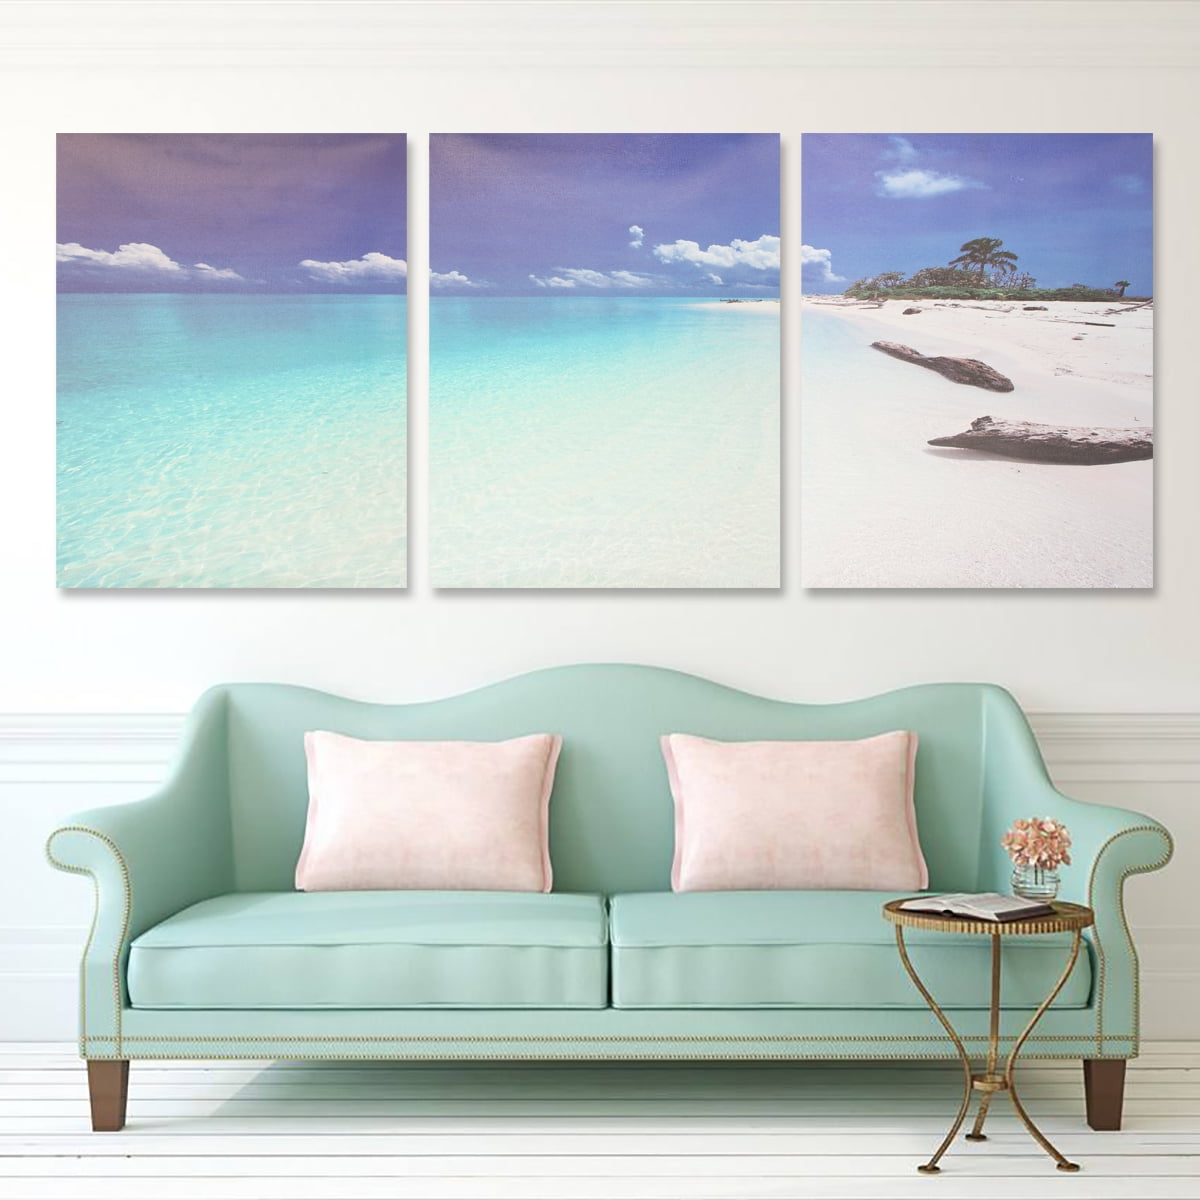 3 Piece Canvas Wall Art Modern Abstract Ocean Beach Poster Art Painting Picture Home Office